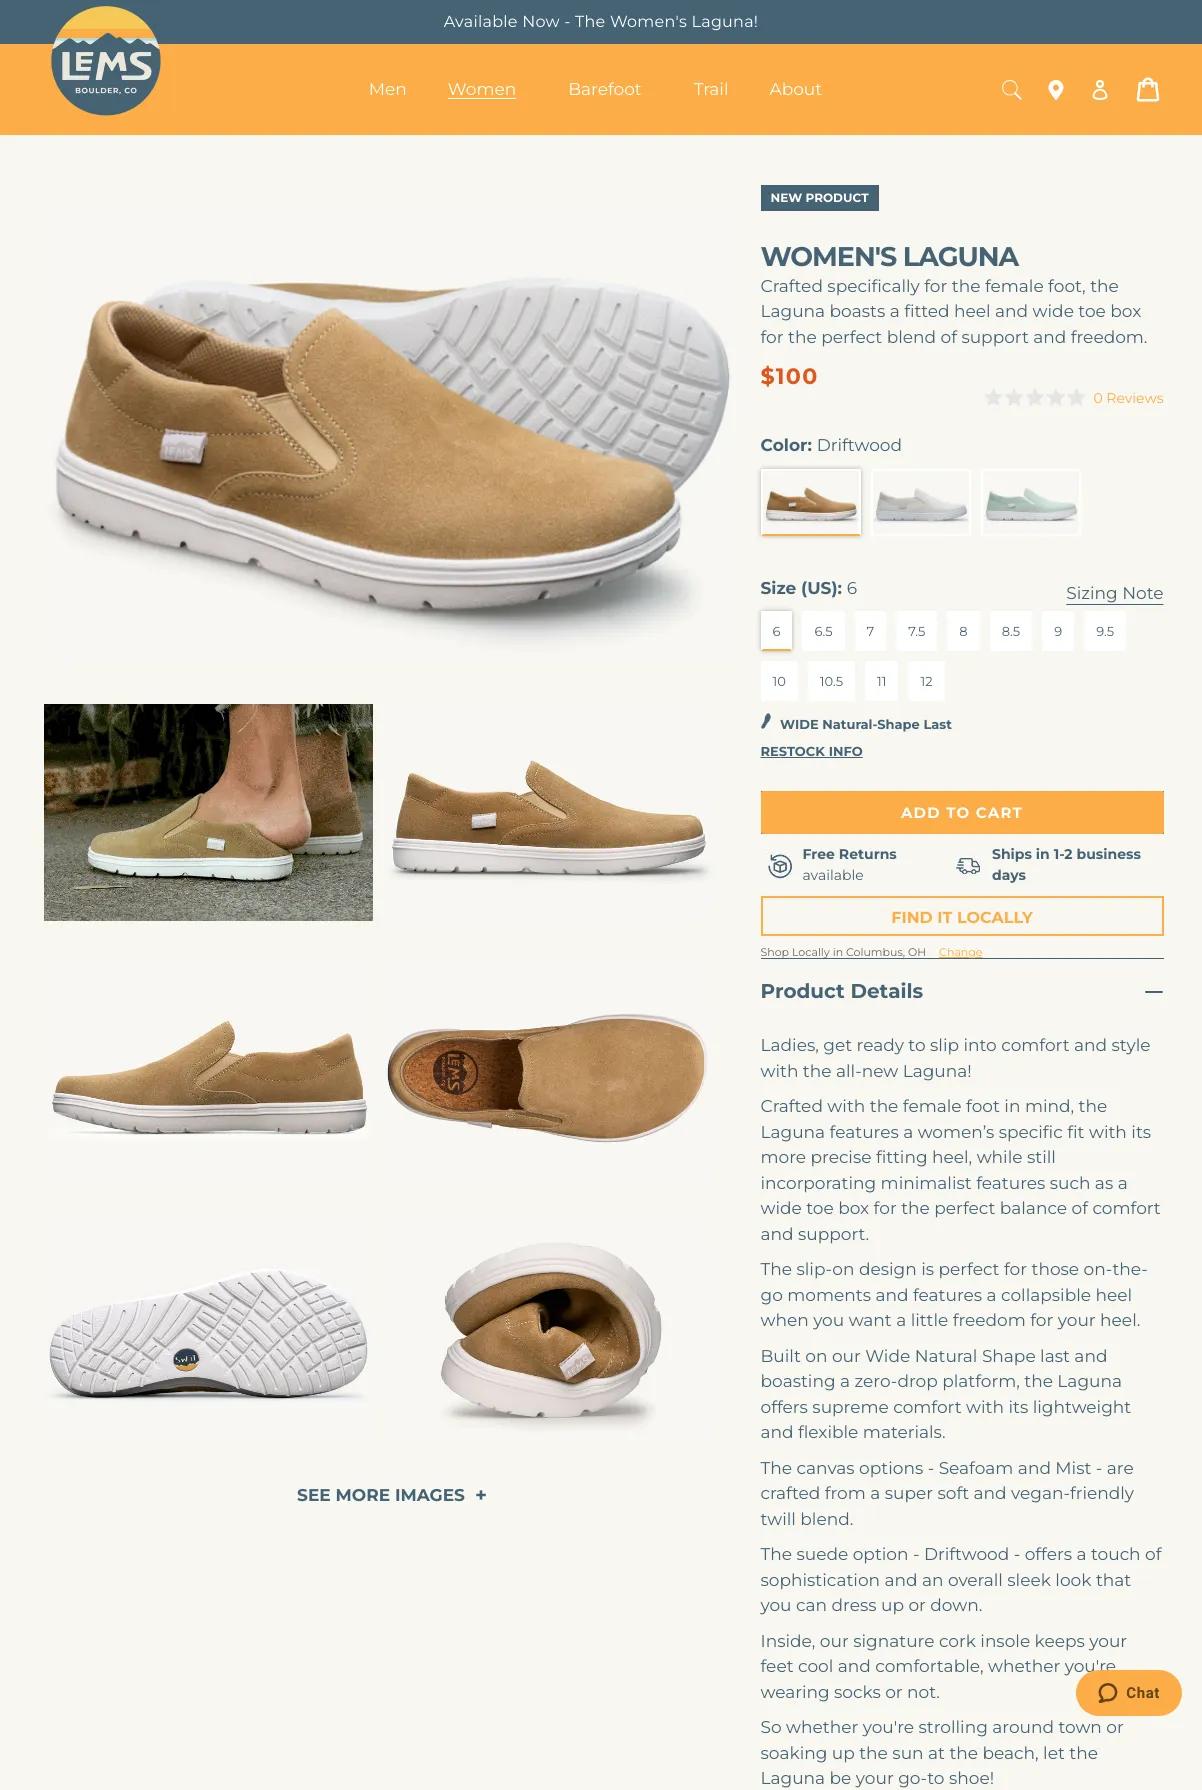 Screenshot 3 of Lems Shoes (Example Shopify Clothing Website)